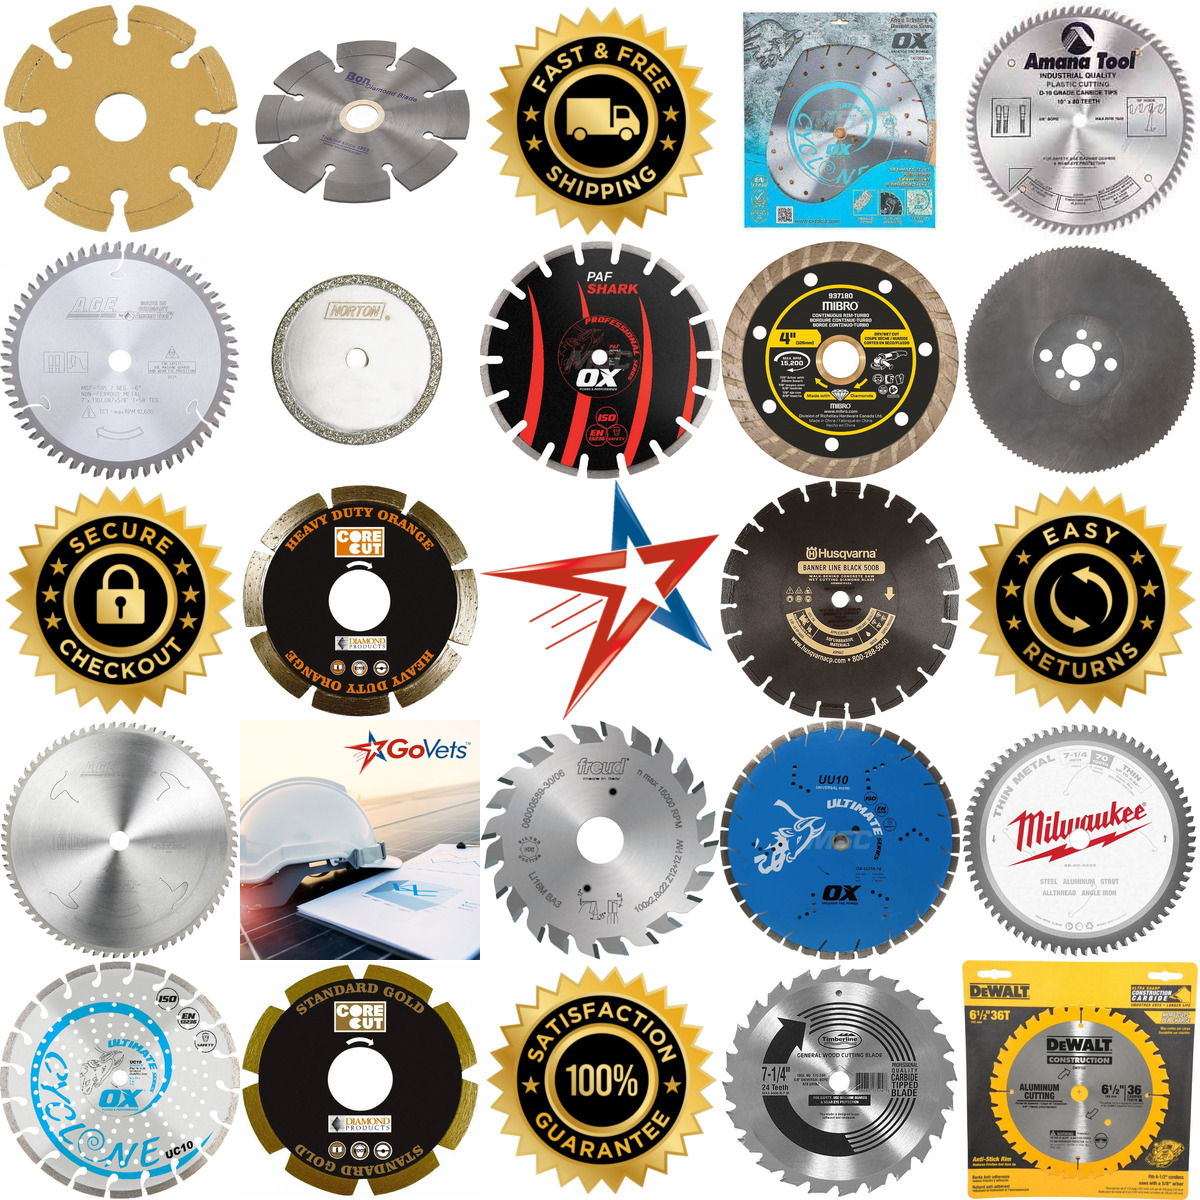 A selection of Circular Saw Blades products on GoVets